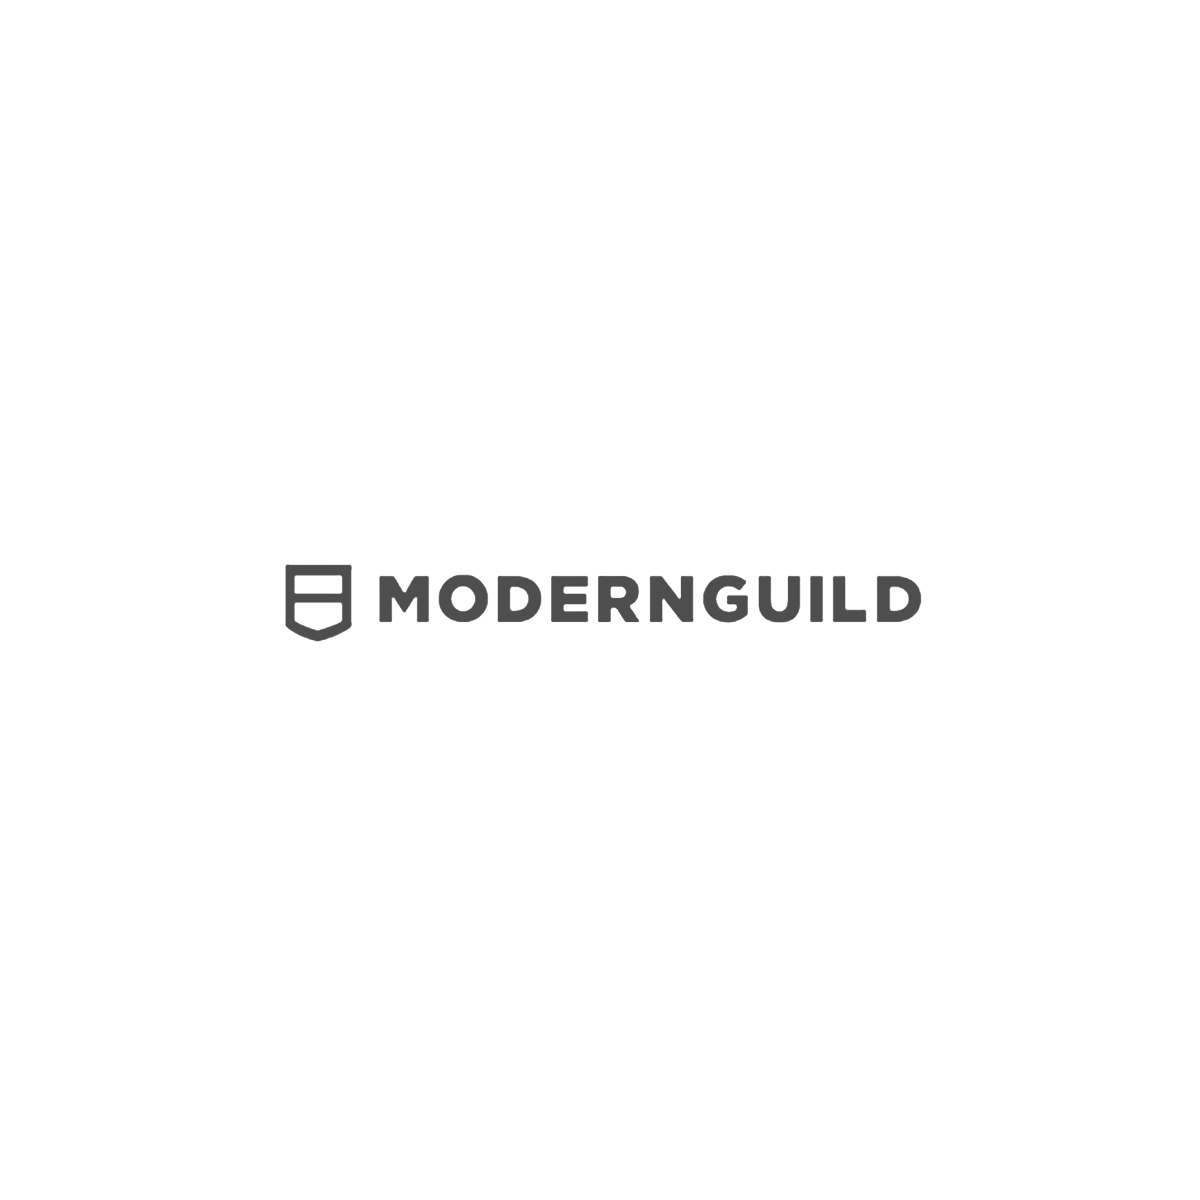 ModernGuild grayscale.png